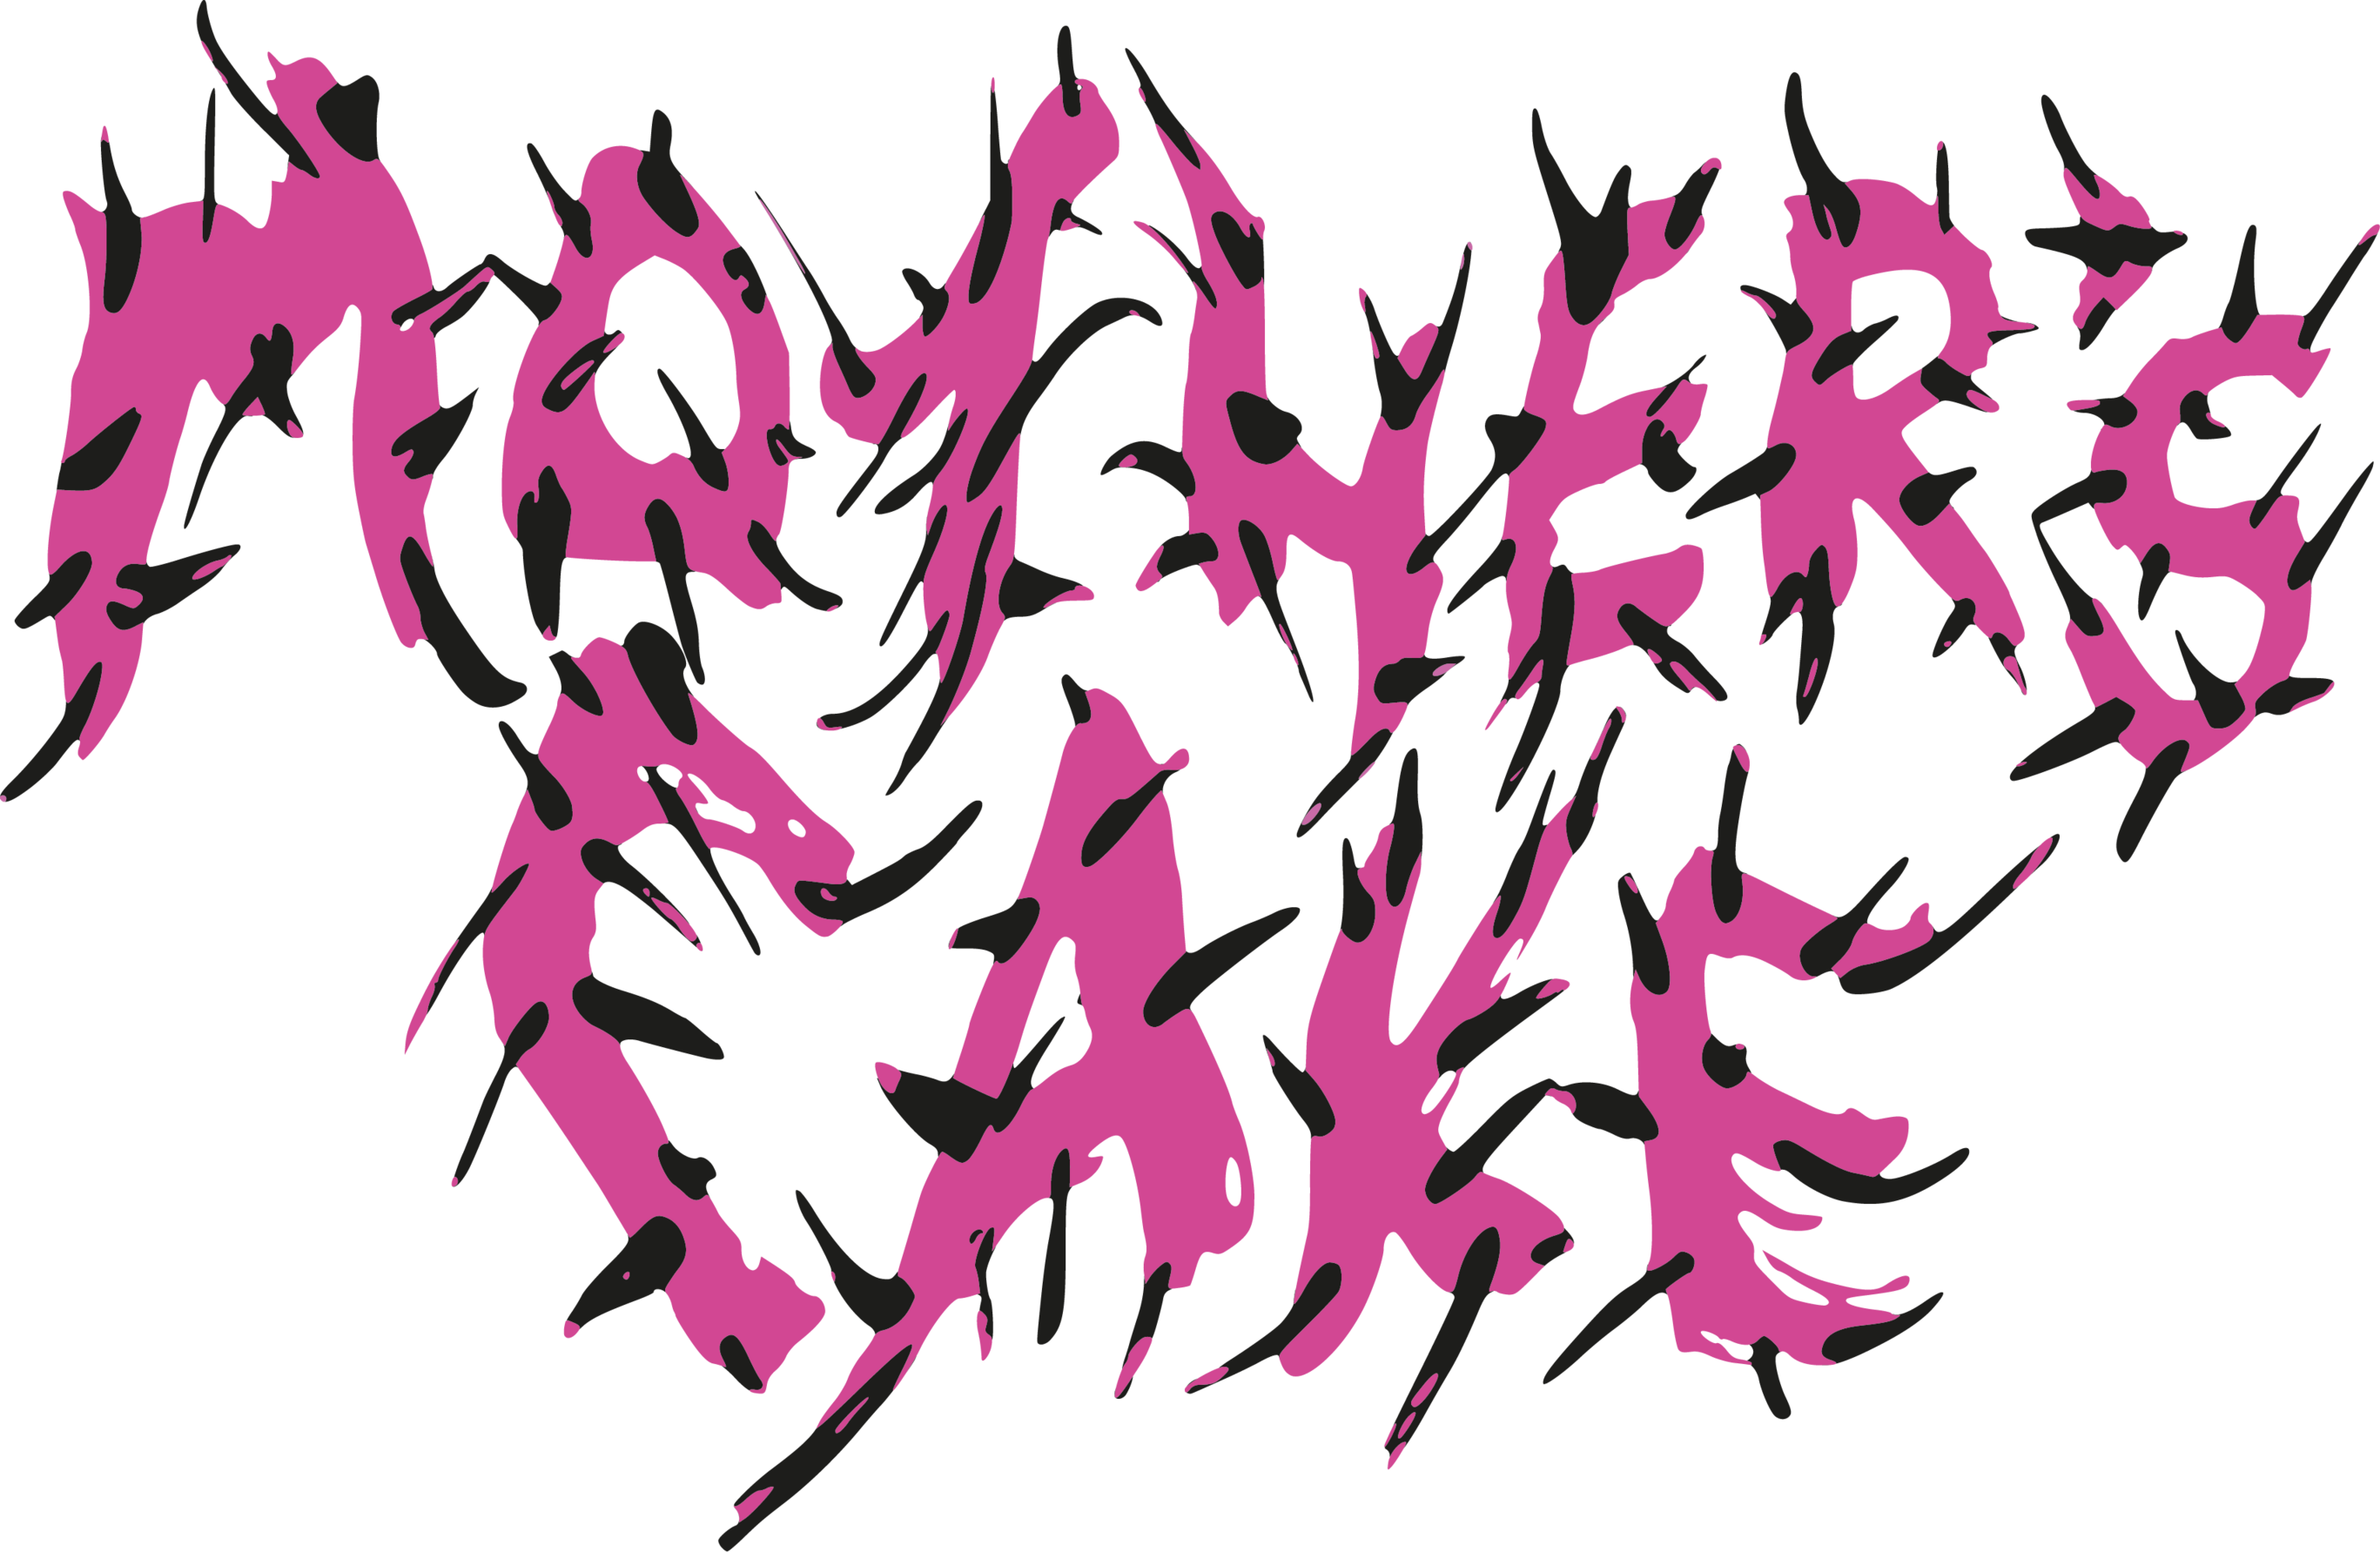 Mother's Cake label in pink with black dorns and a spooky font